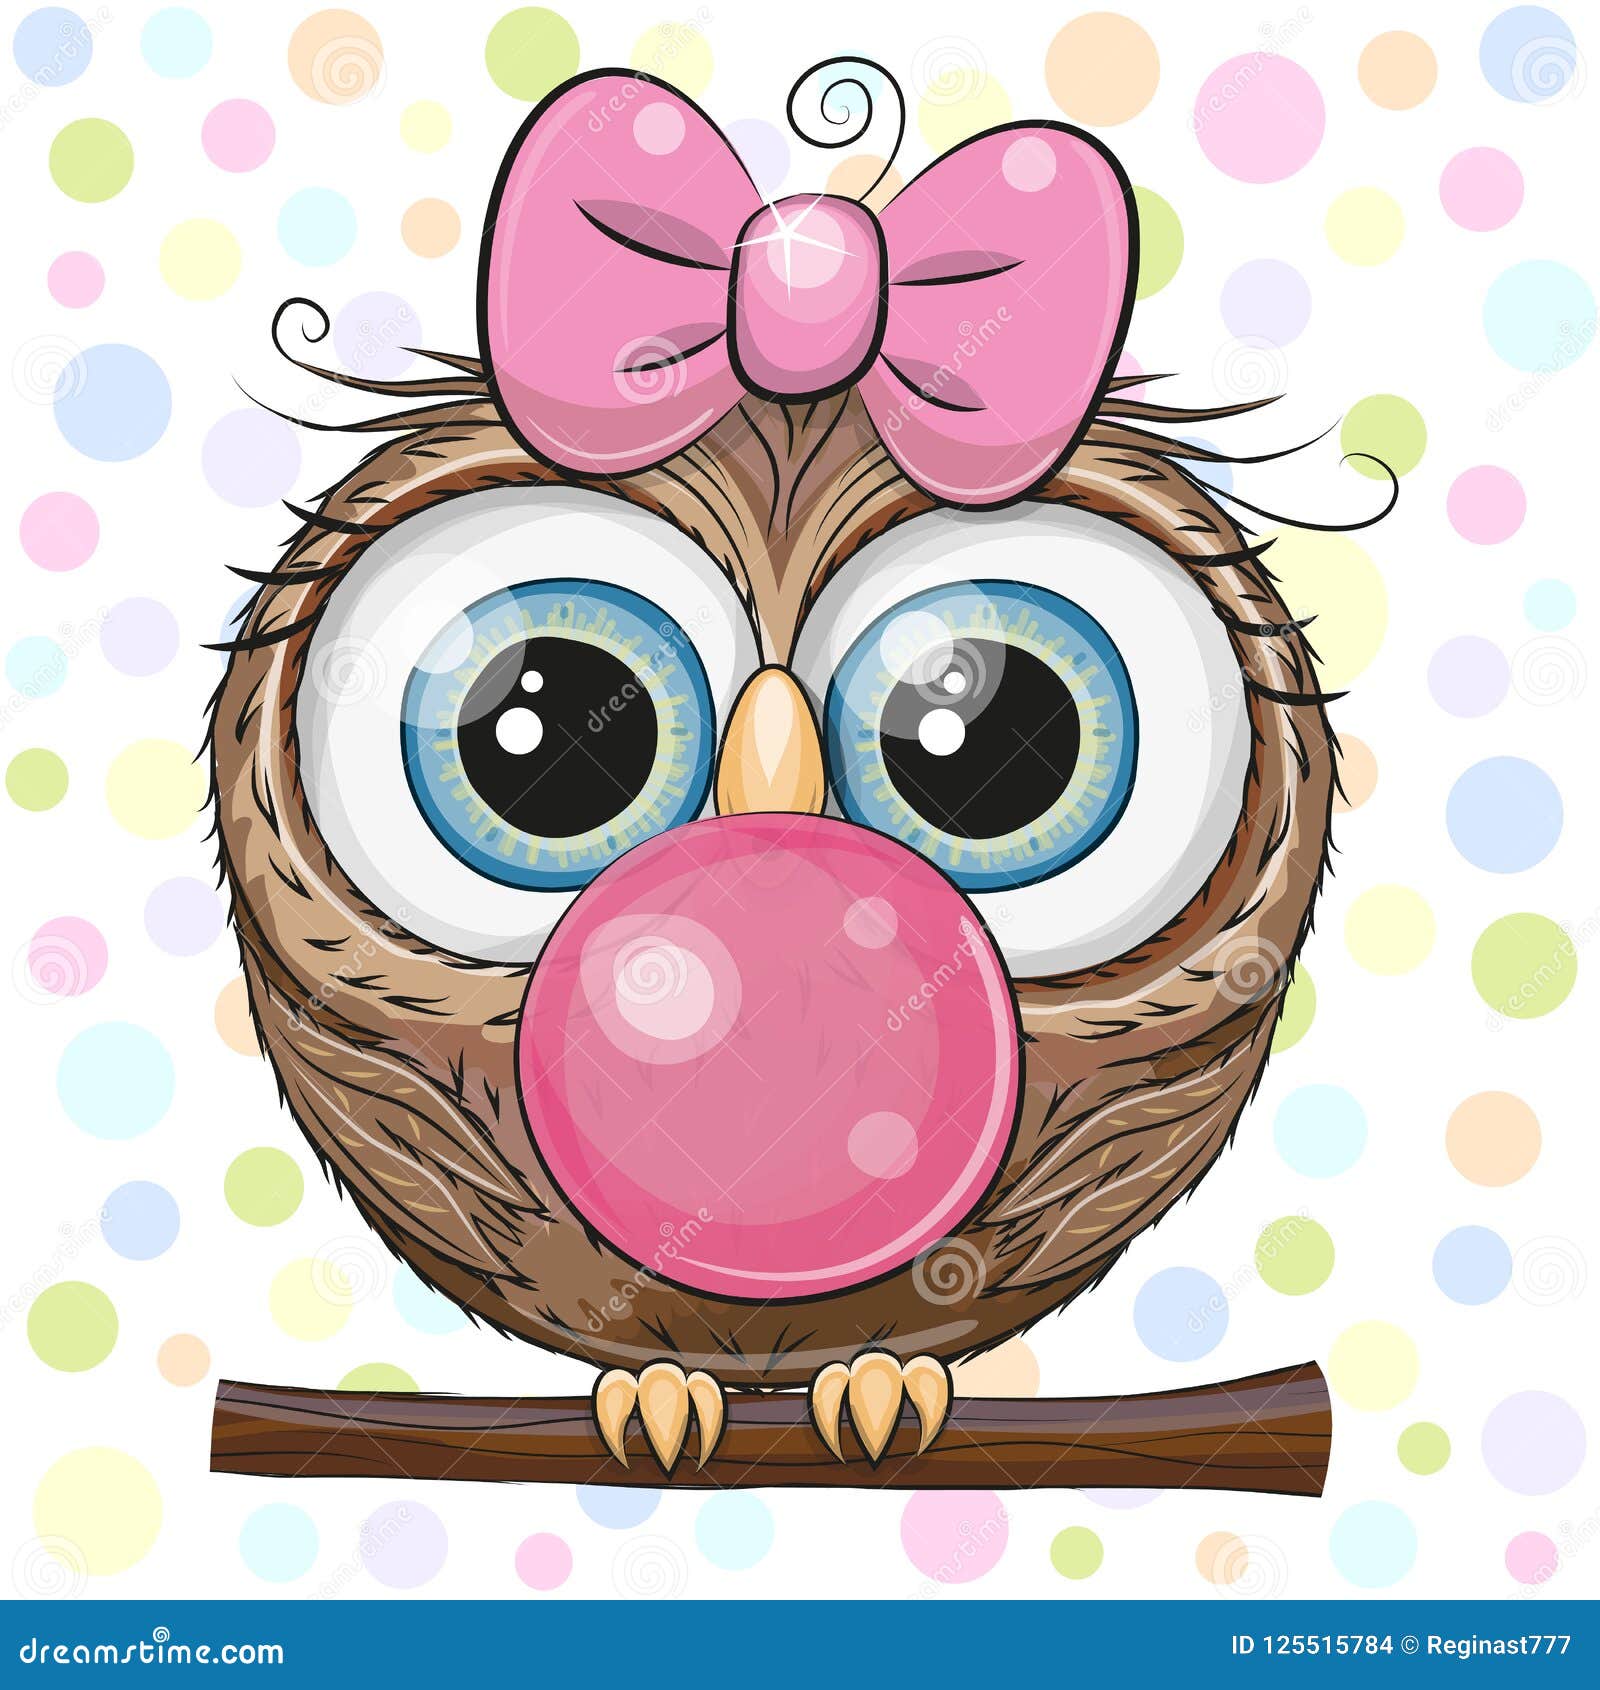 Cute Cartoon Owl with Bubble Gum Stock Vector - Illustration of cool ...